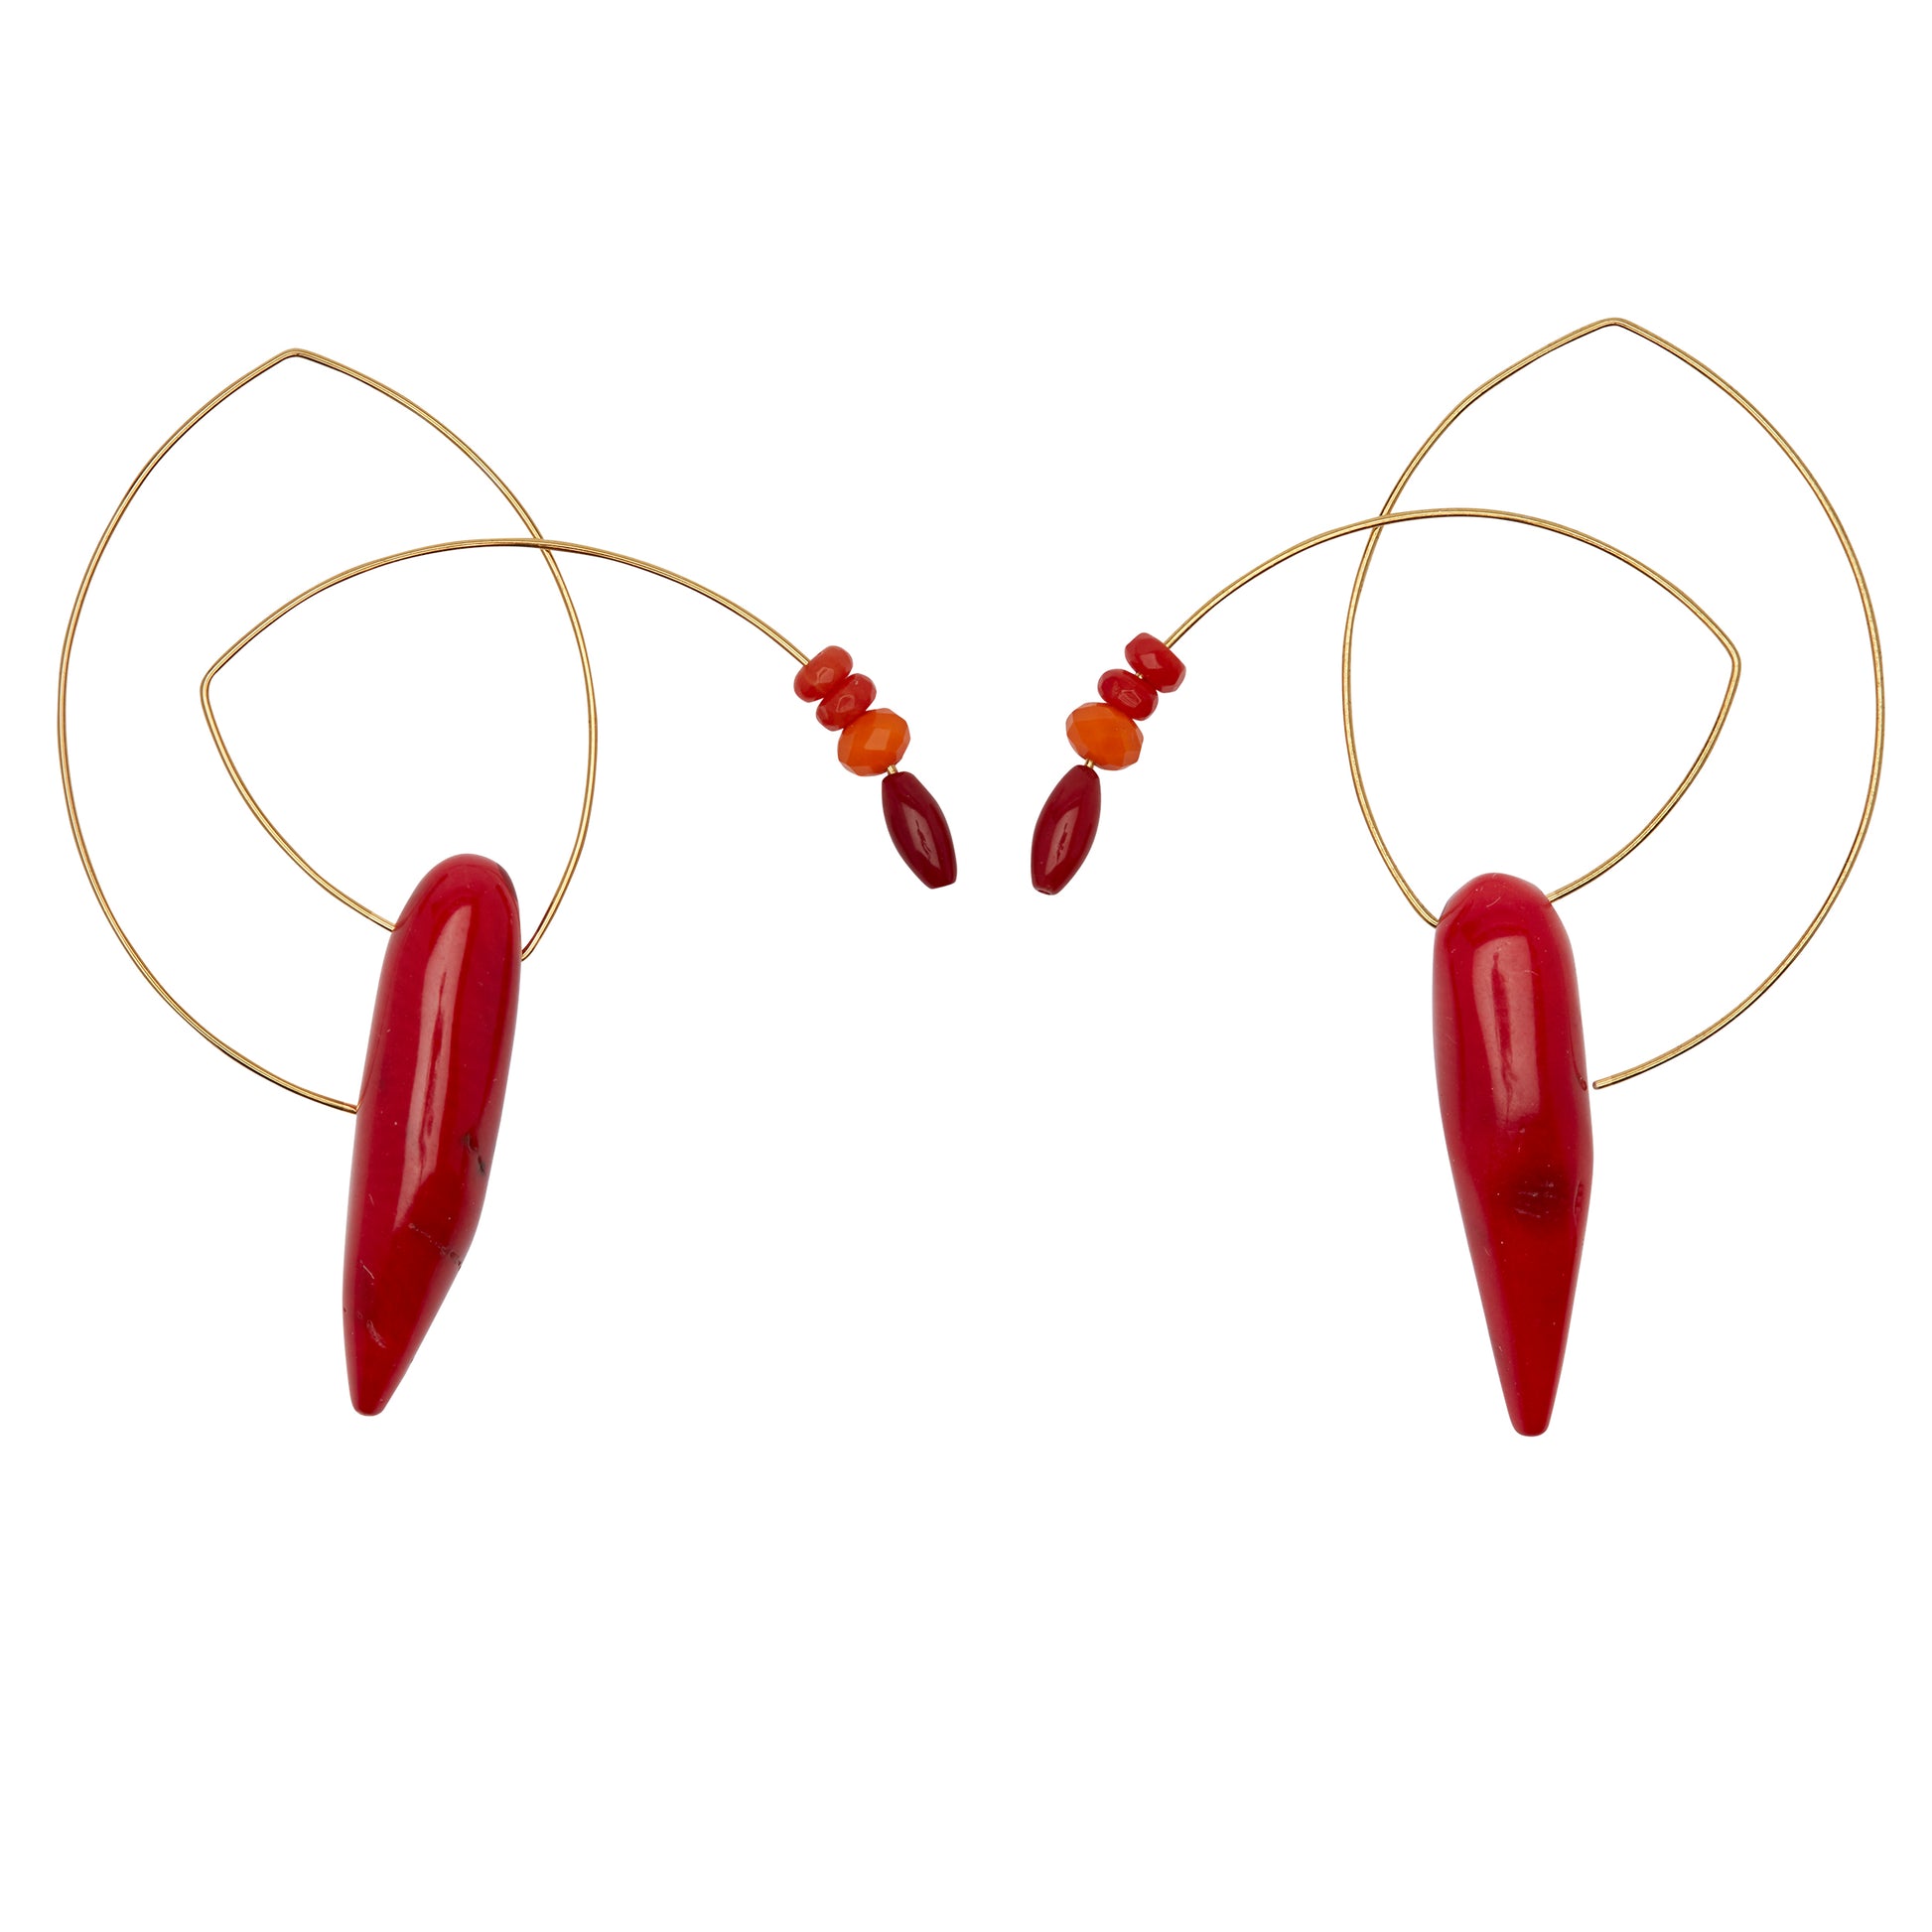 Large Angled Loop Earrings with Red Coral and Orange Coral 